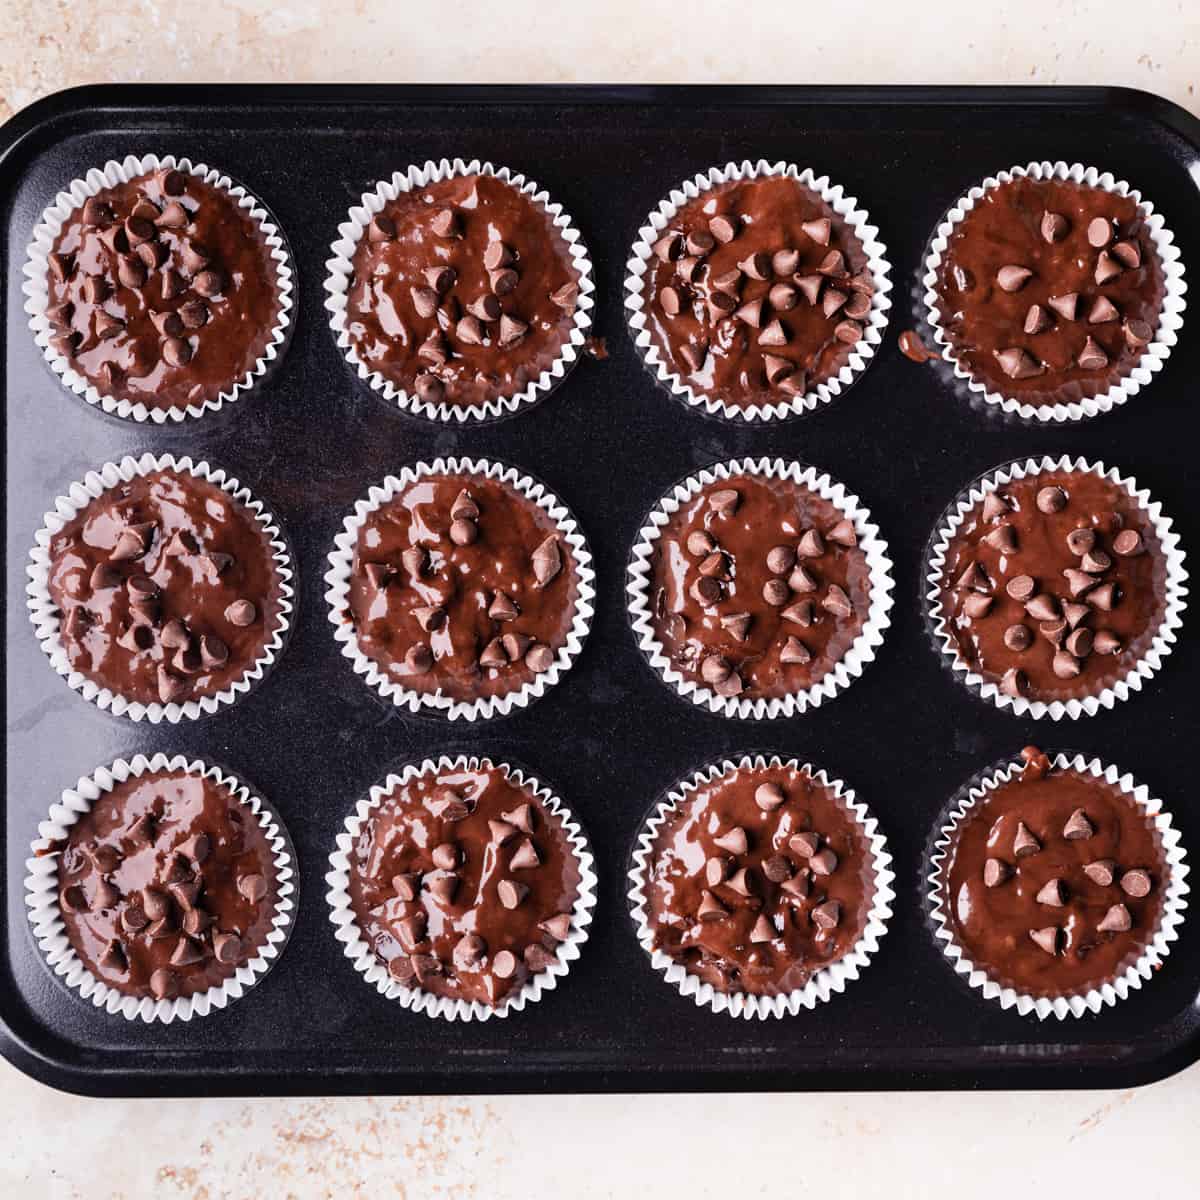 muffin pan filled with chocolate muffin batter topped with extra chocolate chips.